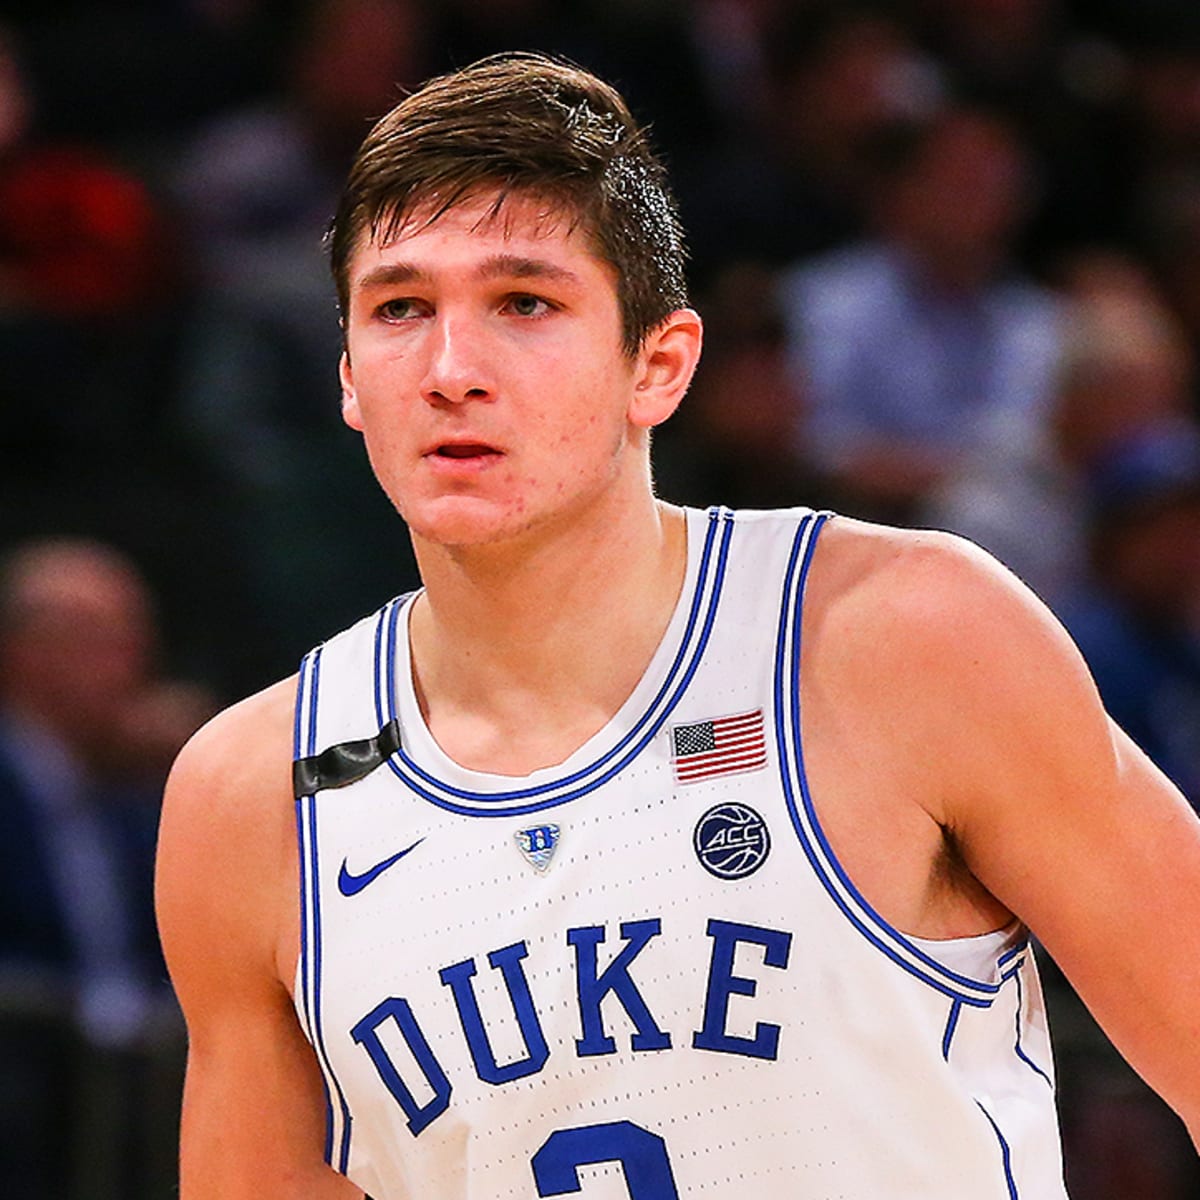 Grayson Allen leads Duke to NCAA title. Played in City of Palms.